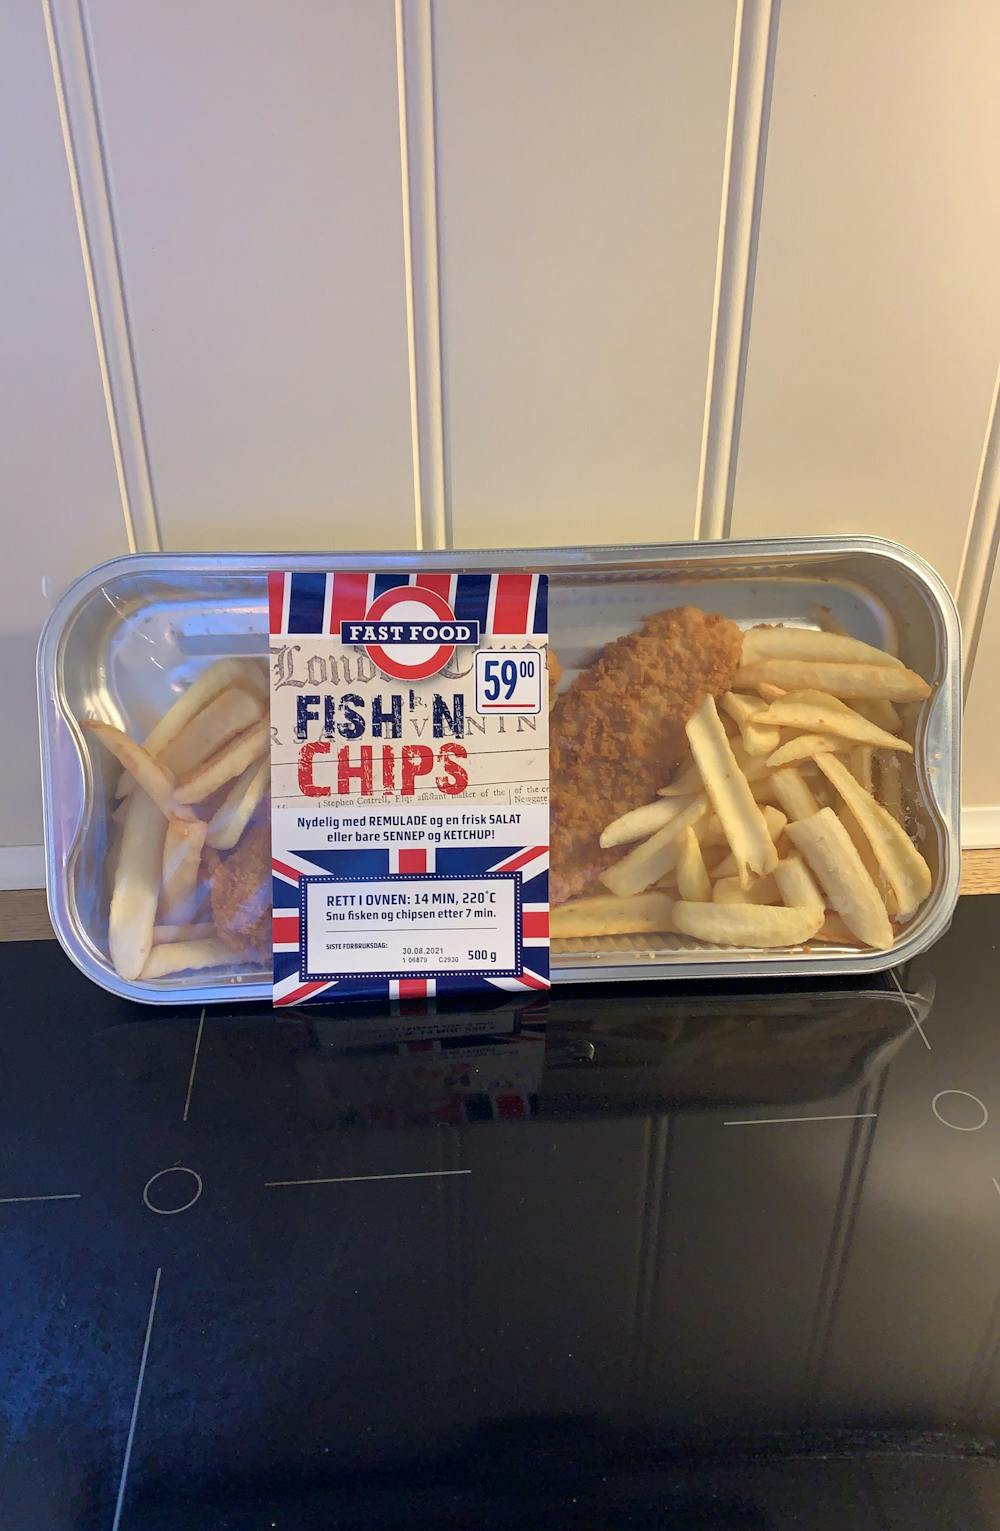 Fish' n chips, Fast food